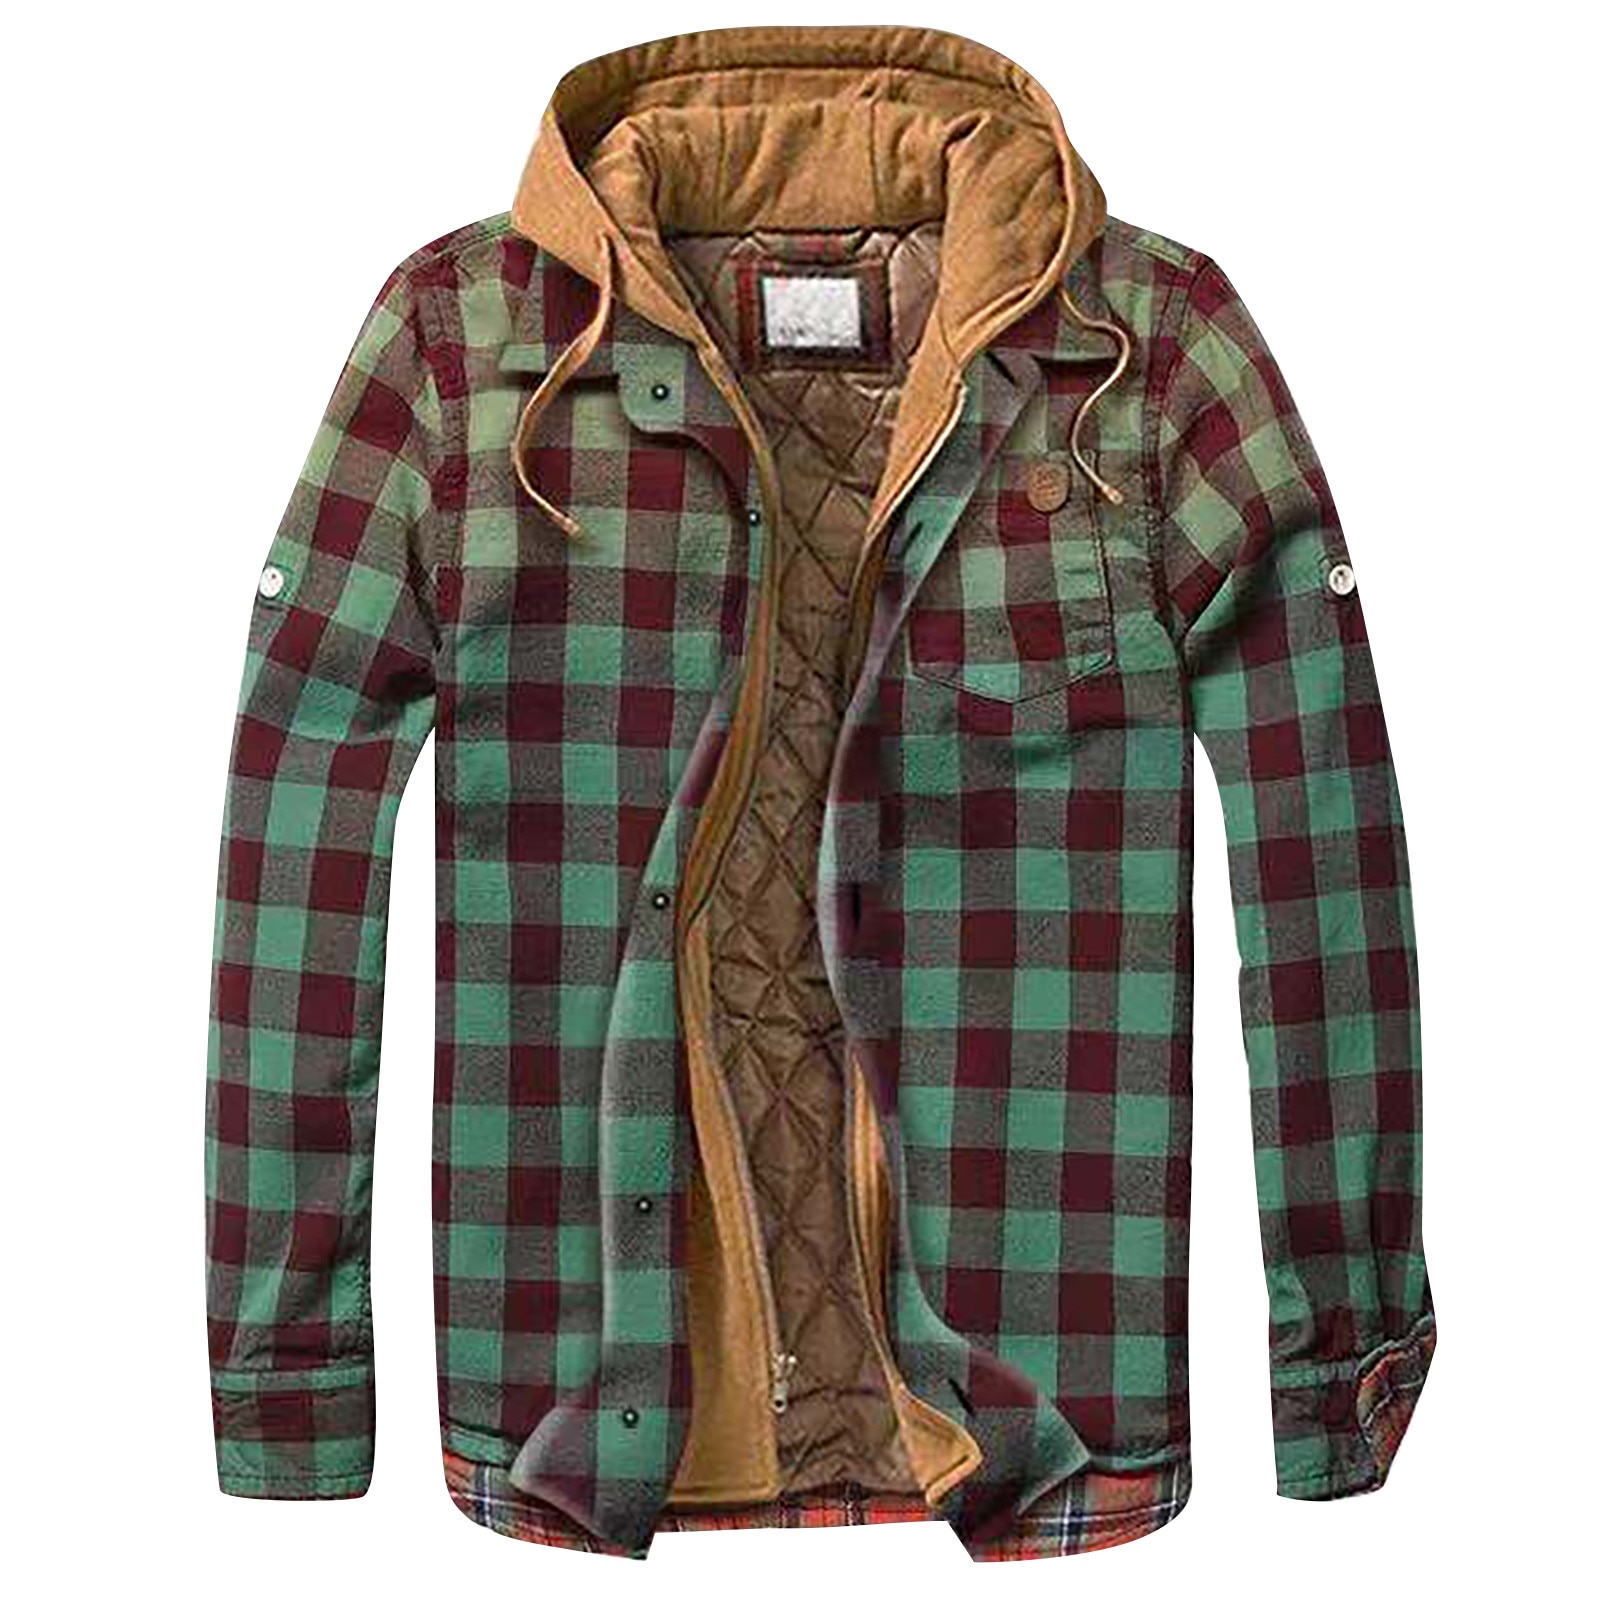 Men's coat Quilted Lined Button Down Plaid Shirt Add Velvet To Keep Warm Jacket With Hood winter outerwear ropa hombre